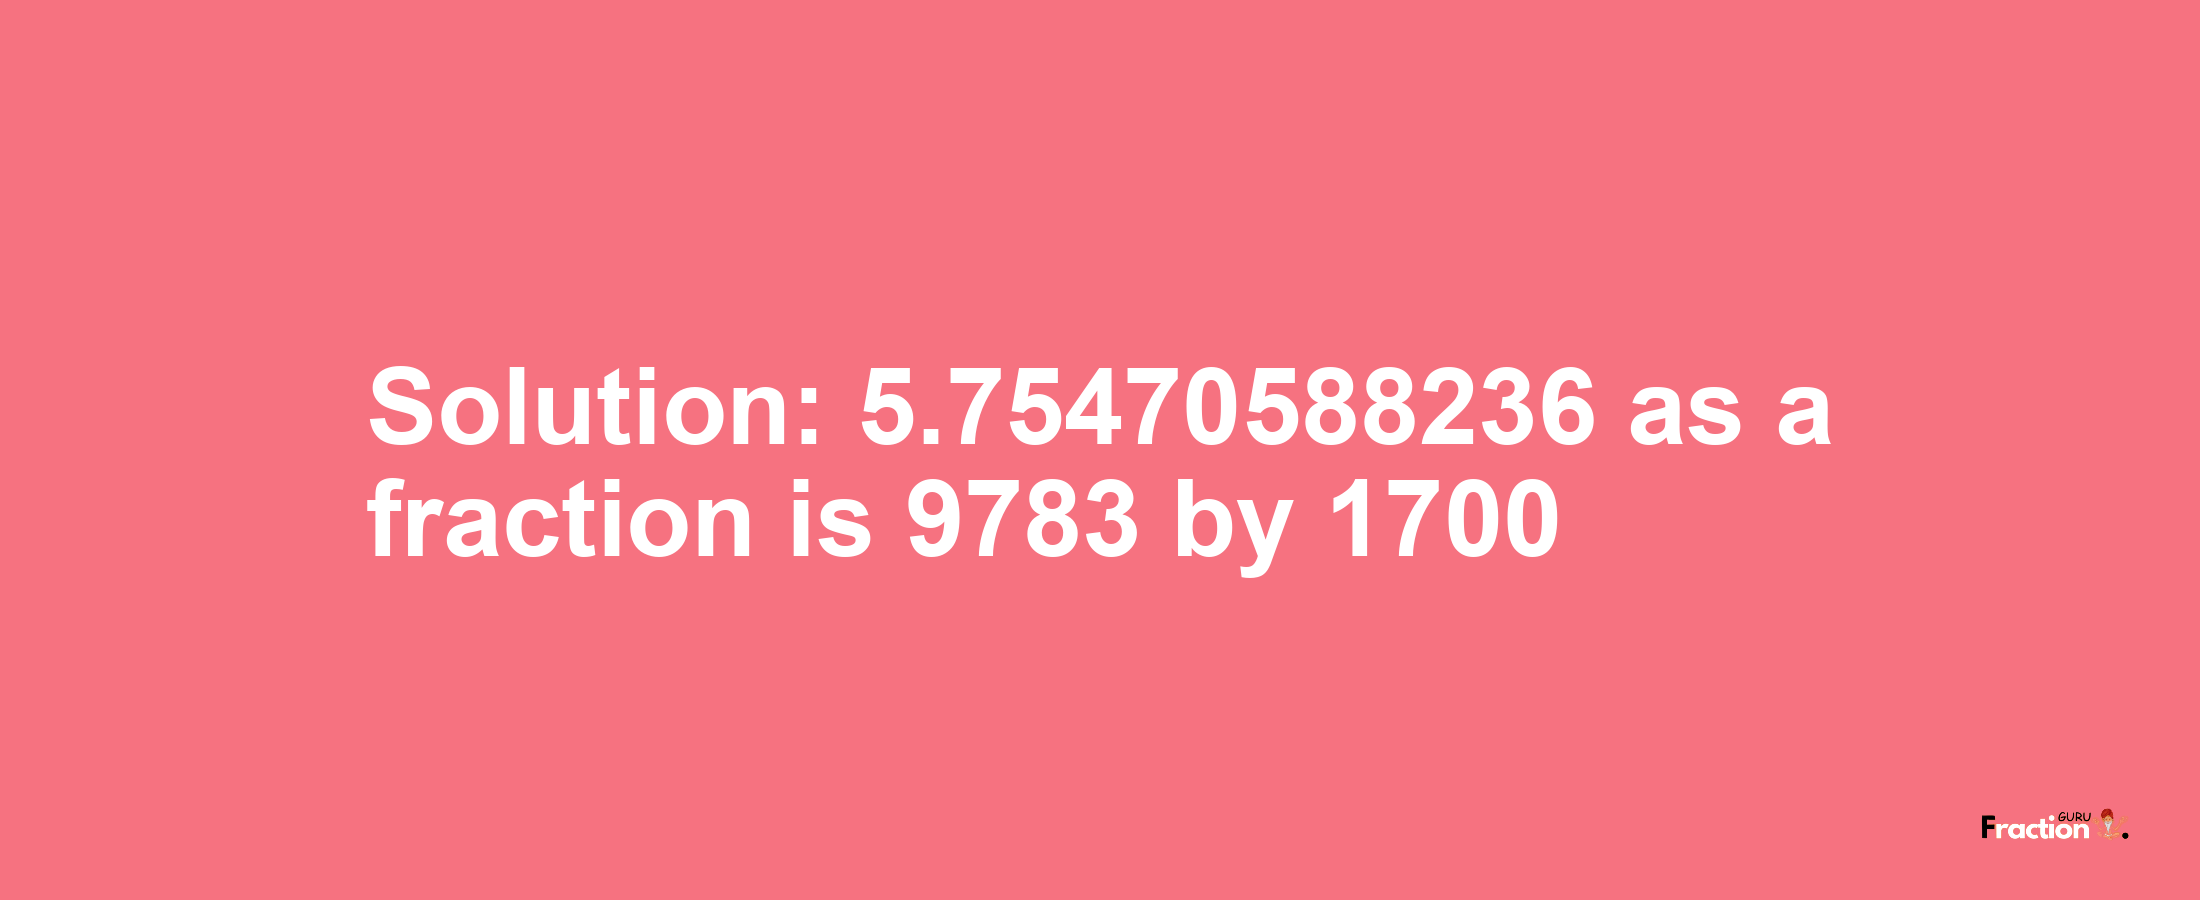 Solution:5.75470588236 as a fraction is 9783/1700